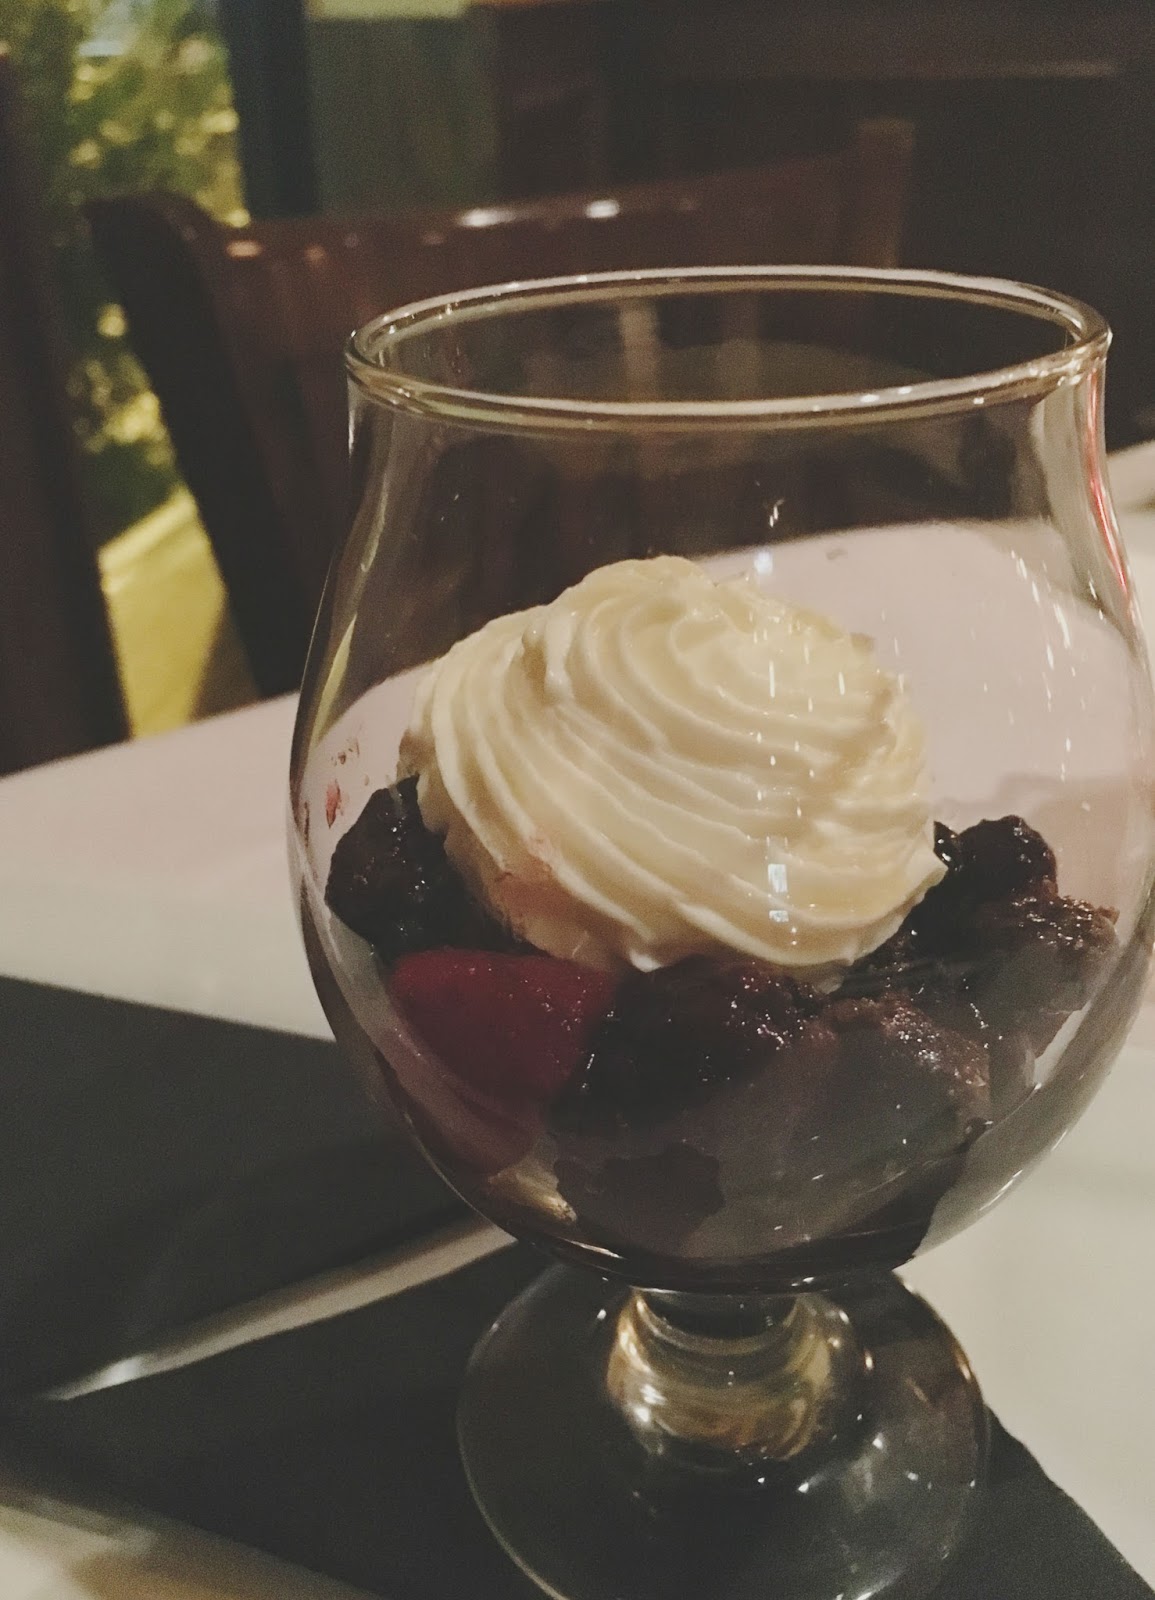 berries and cream at The Union Kitchen, a restaurant in Houston